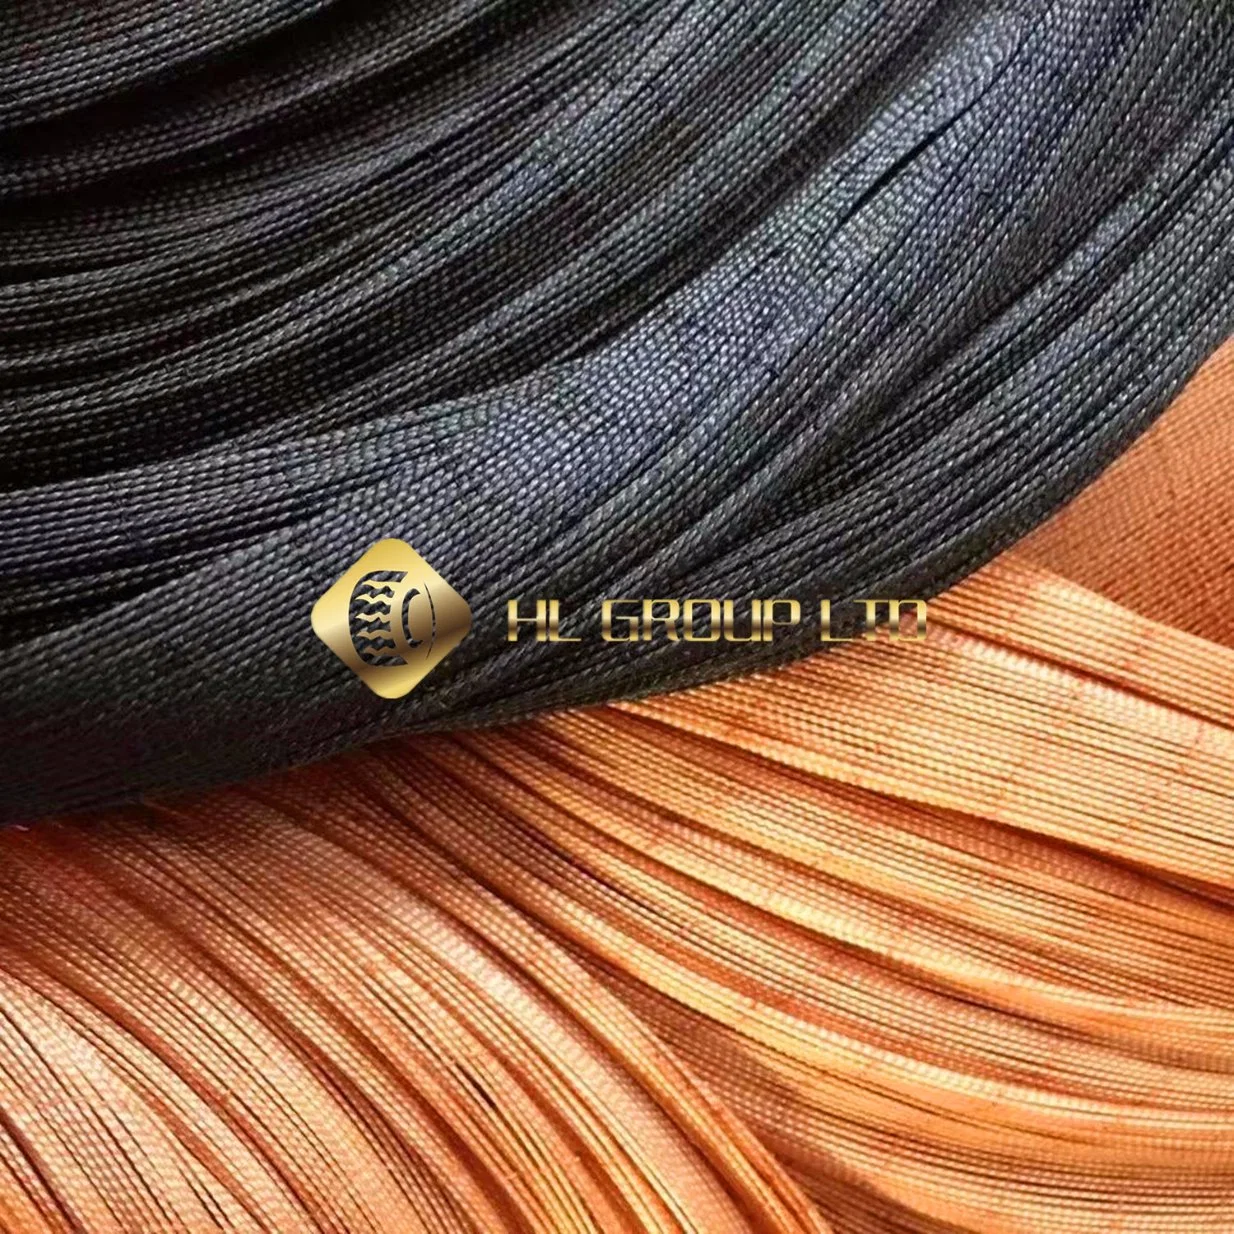 off Grade Dipped Tire Cord Fabric for Making Fishing Net and Ropes